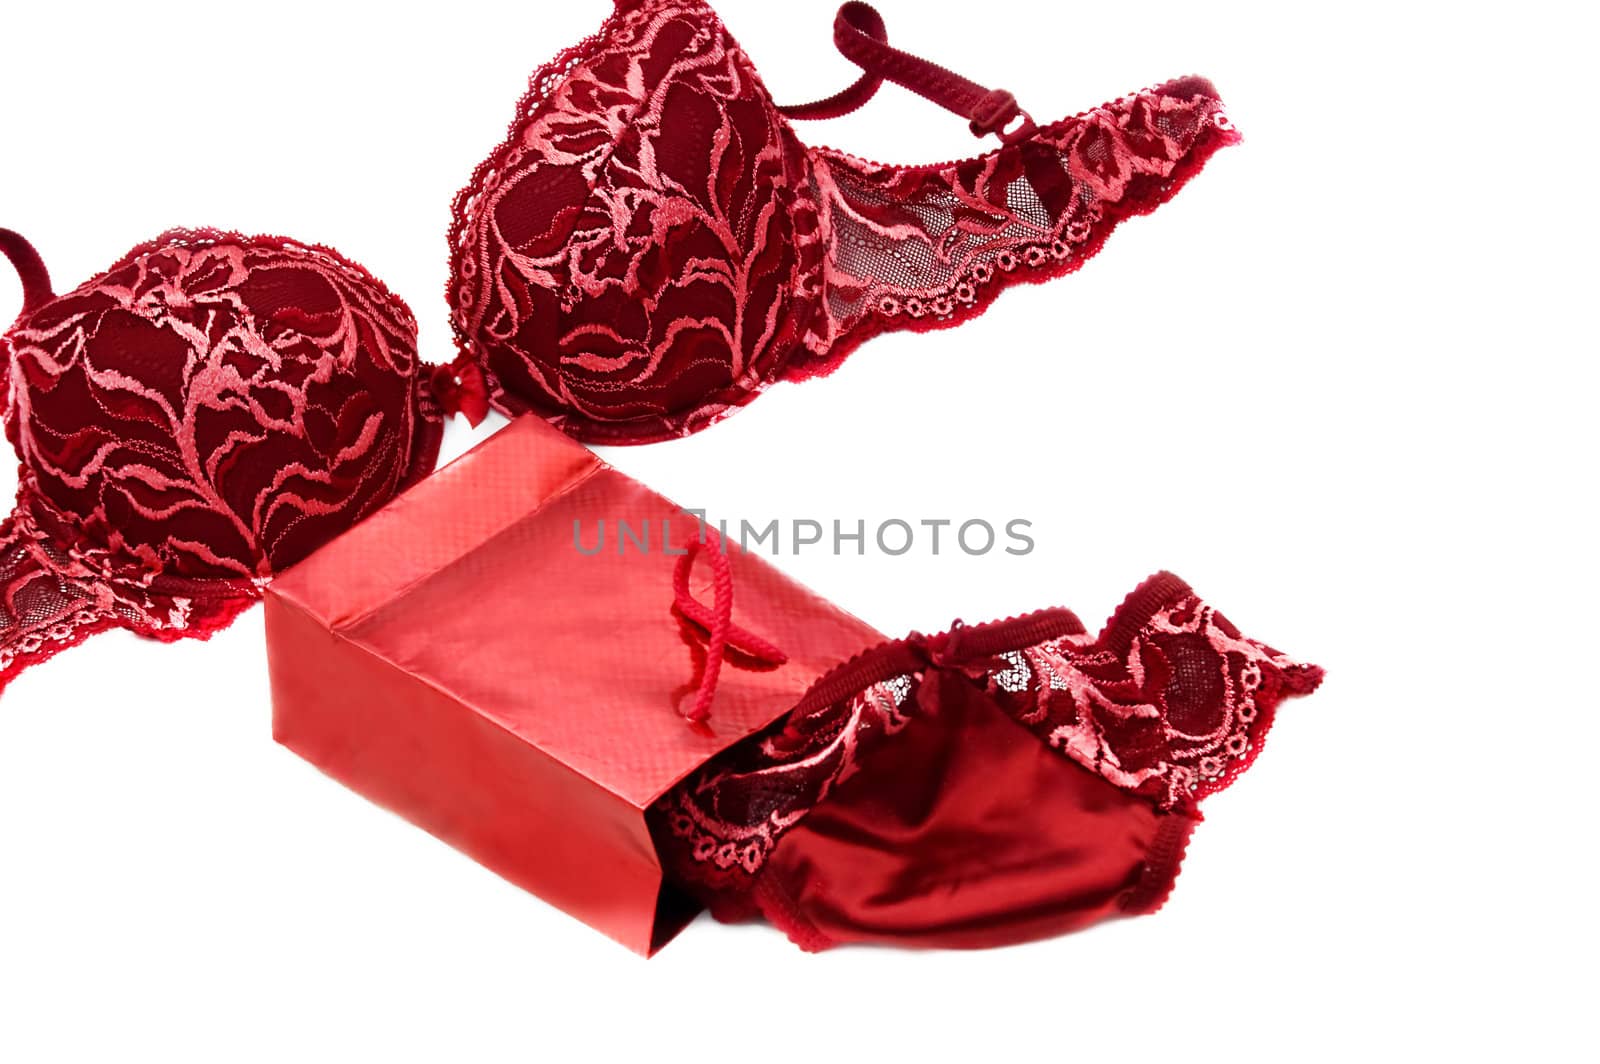 red lace silky lingerie near red present box over white